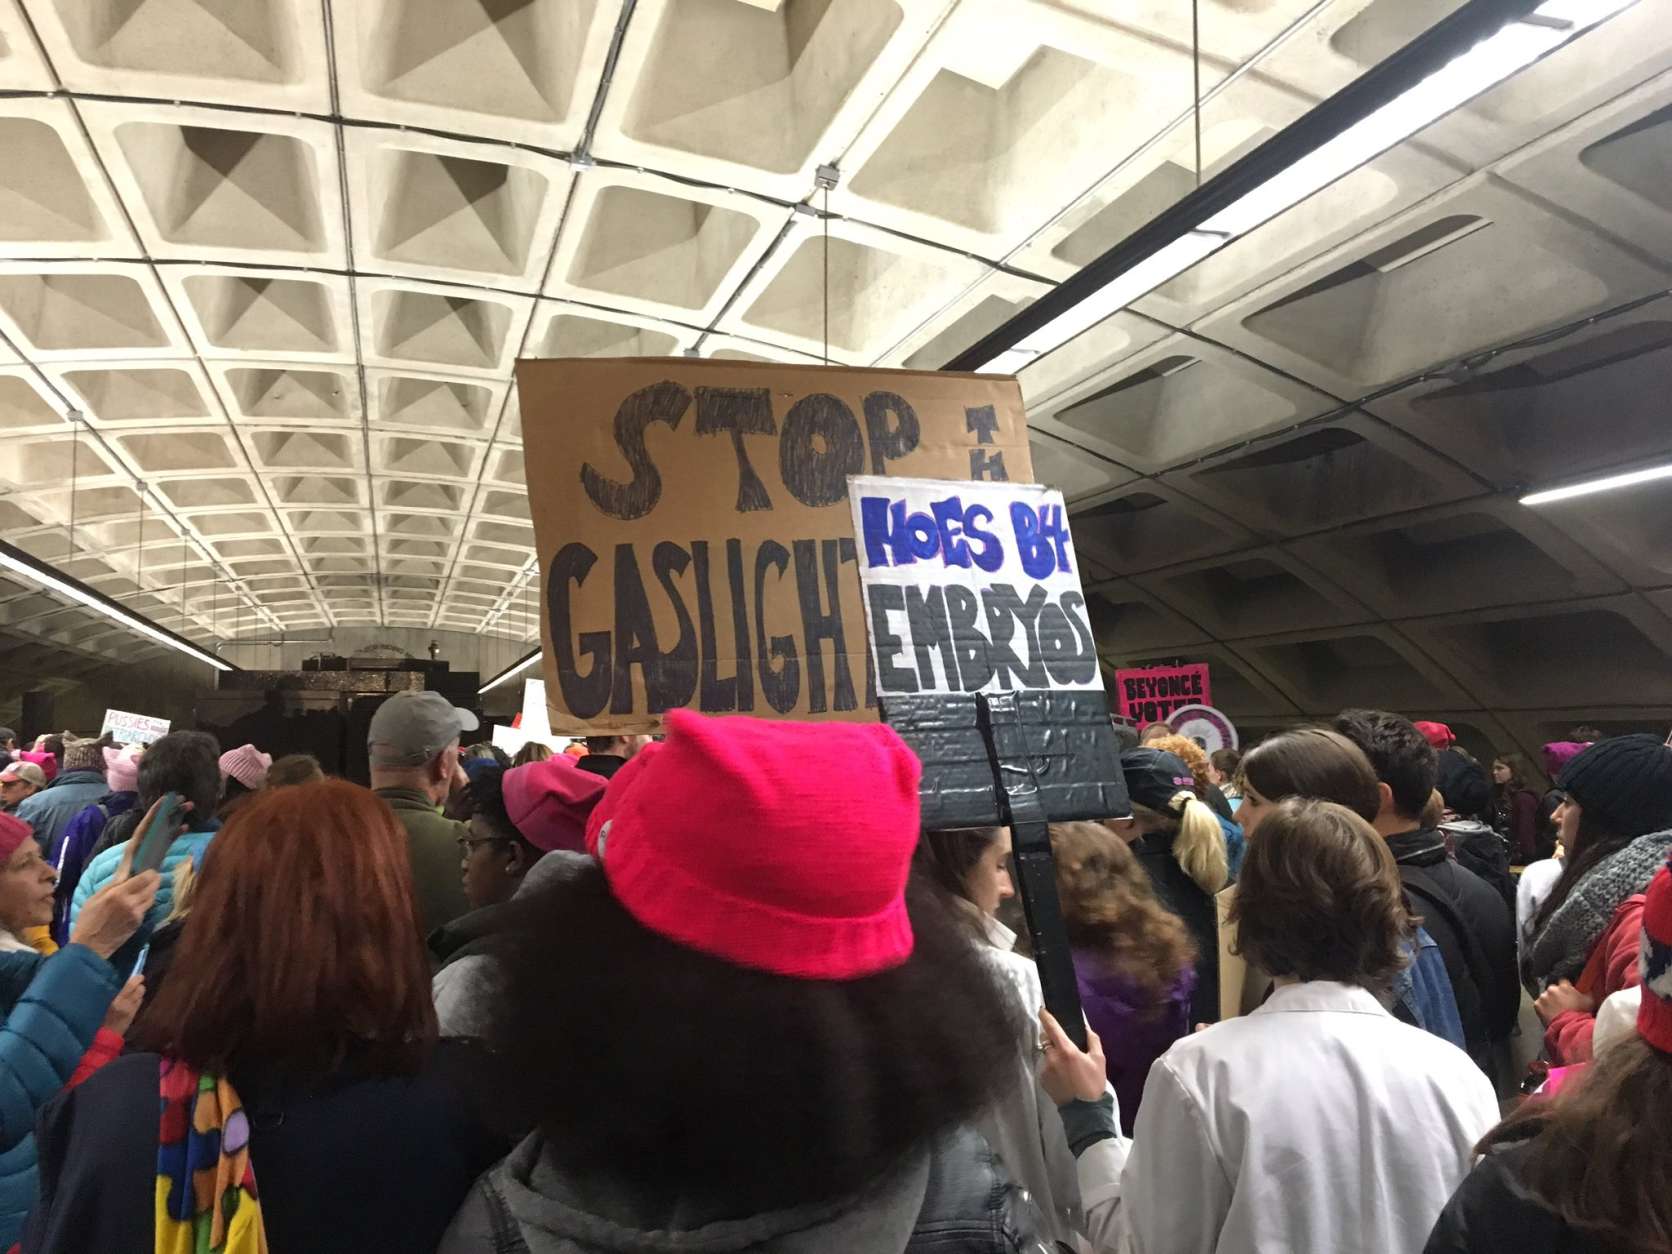 Chants of "Fired up, ready to go" were heard at L'Enfant station, sparking cheers among people headed toward the Women's March on Washington Saturday morning, Jan. 21, 2017. (WTOP/Max Smith)